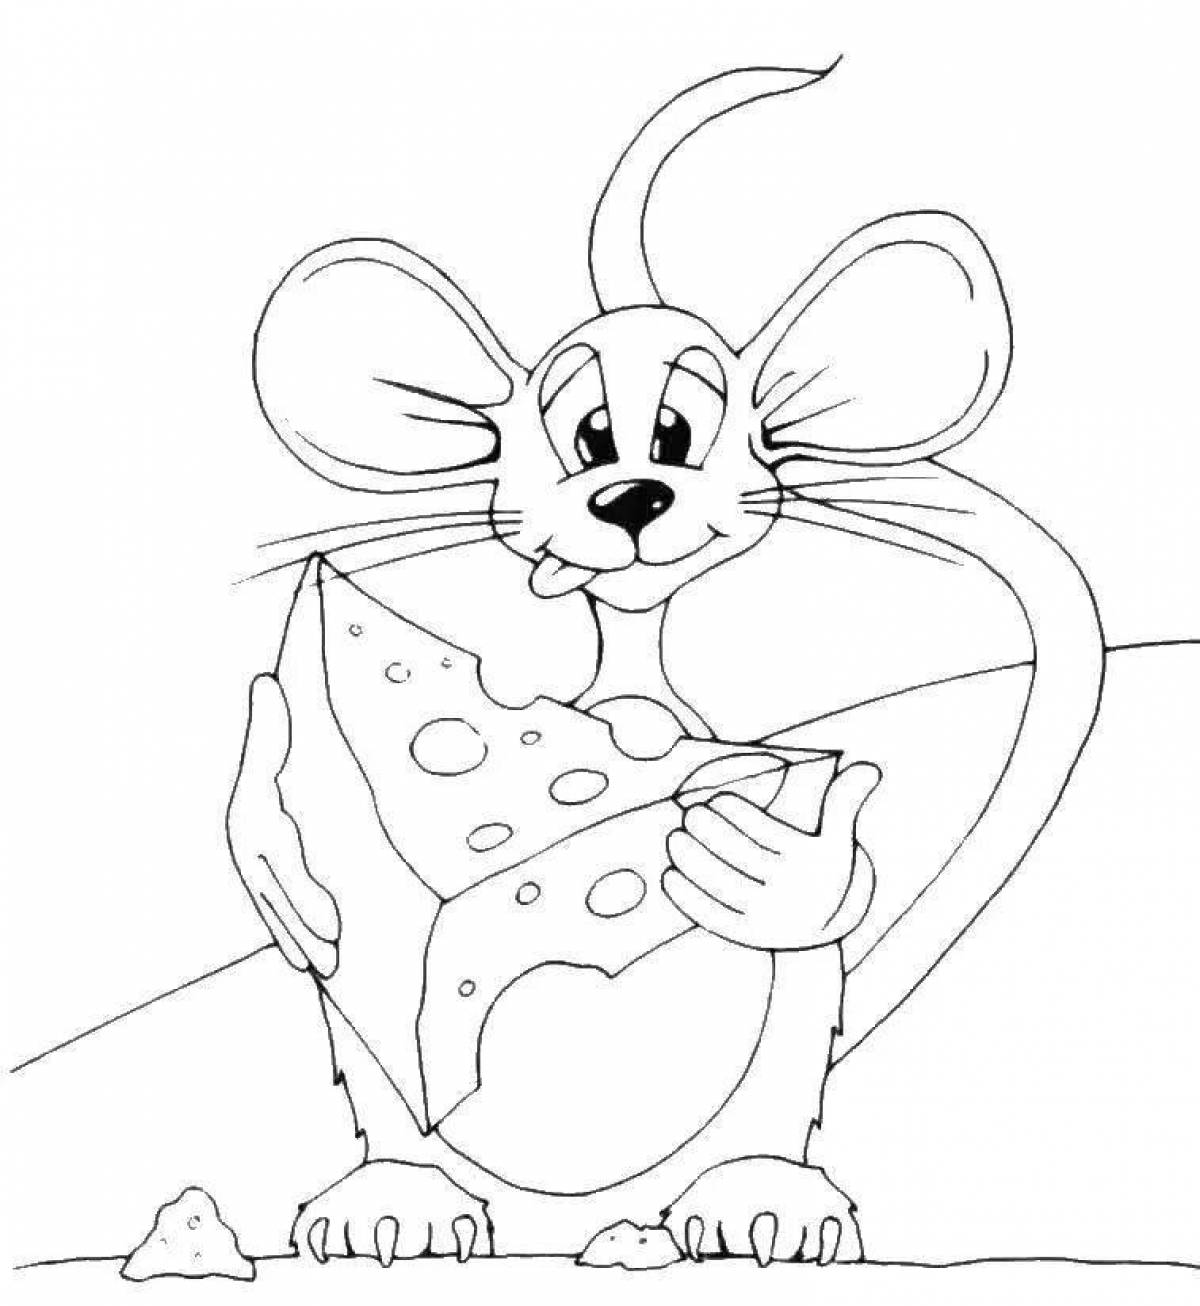 Coloring cute little mouse with cheese